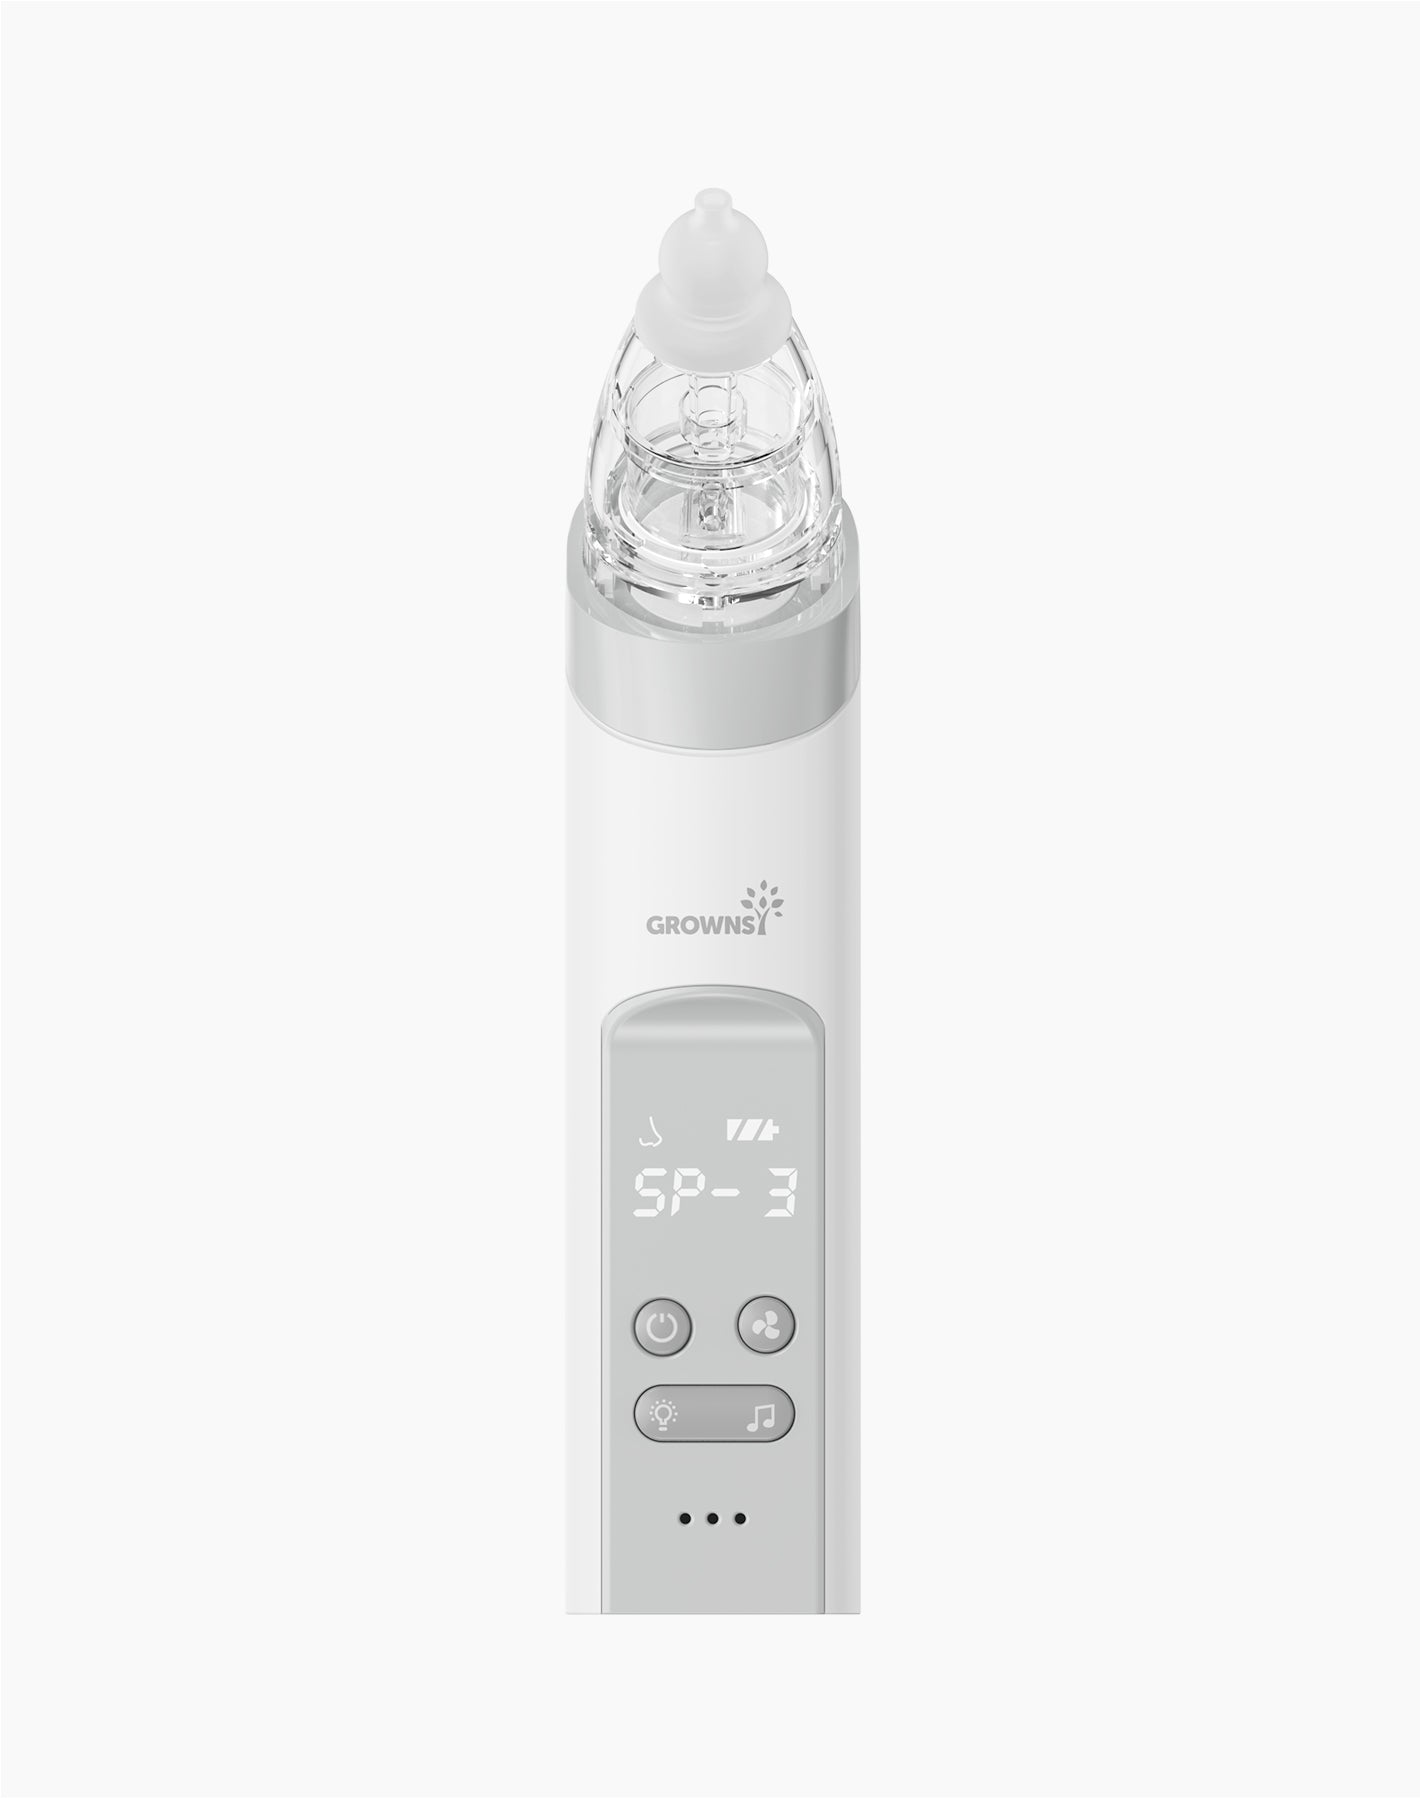 Baby Nasal Aspirator - Safe & Gentle Electric Nose Suction for Baby with 3  Suction Levels Plus Built-In Calming MUsic - Automatic Powered Sucker for